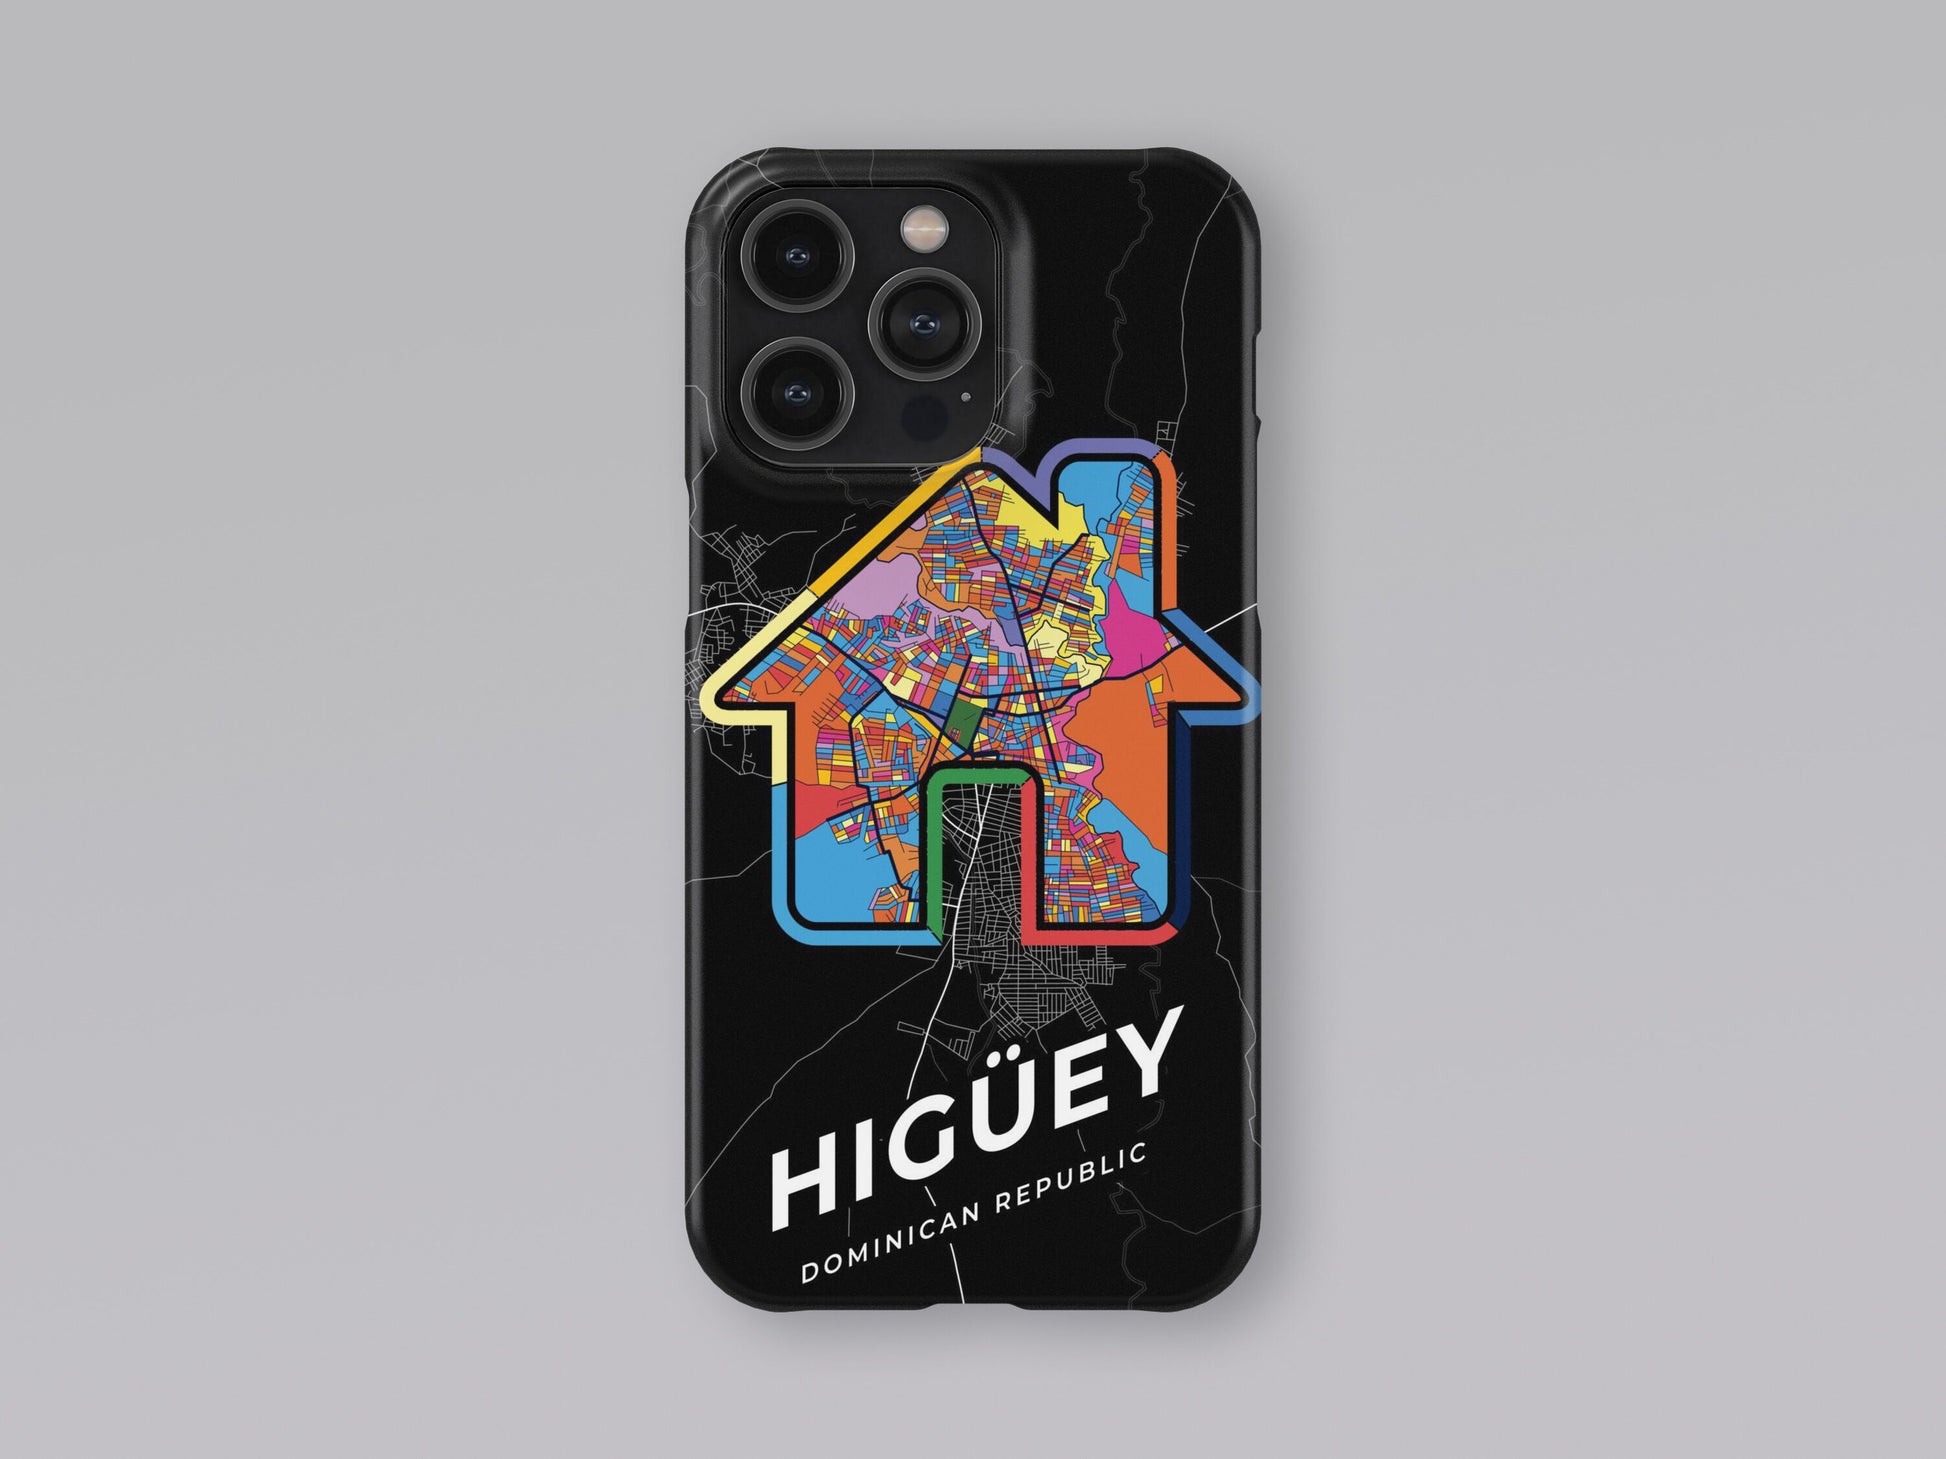 Higüey Dominican Republic slim phone case with colorful icon. Birthday, wedding or housewarming gift. Couple match cases. 3